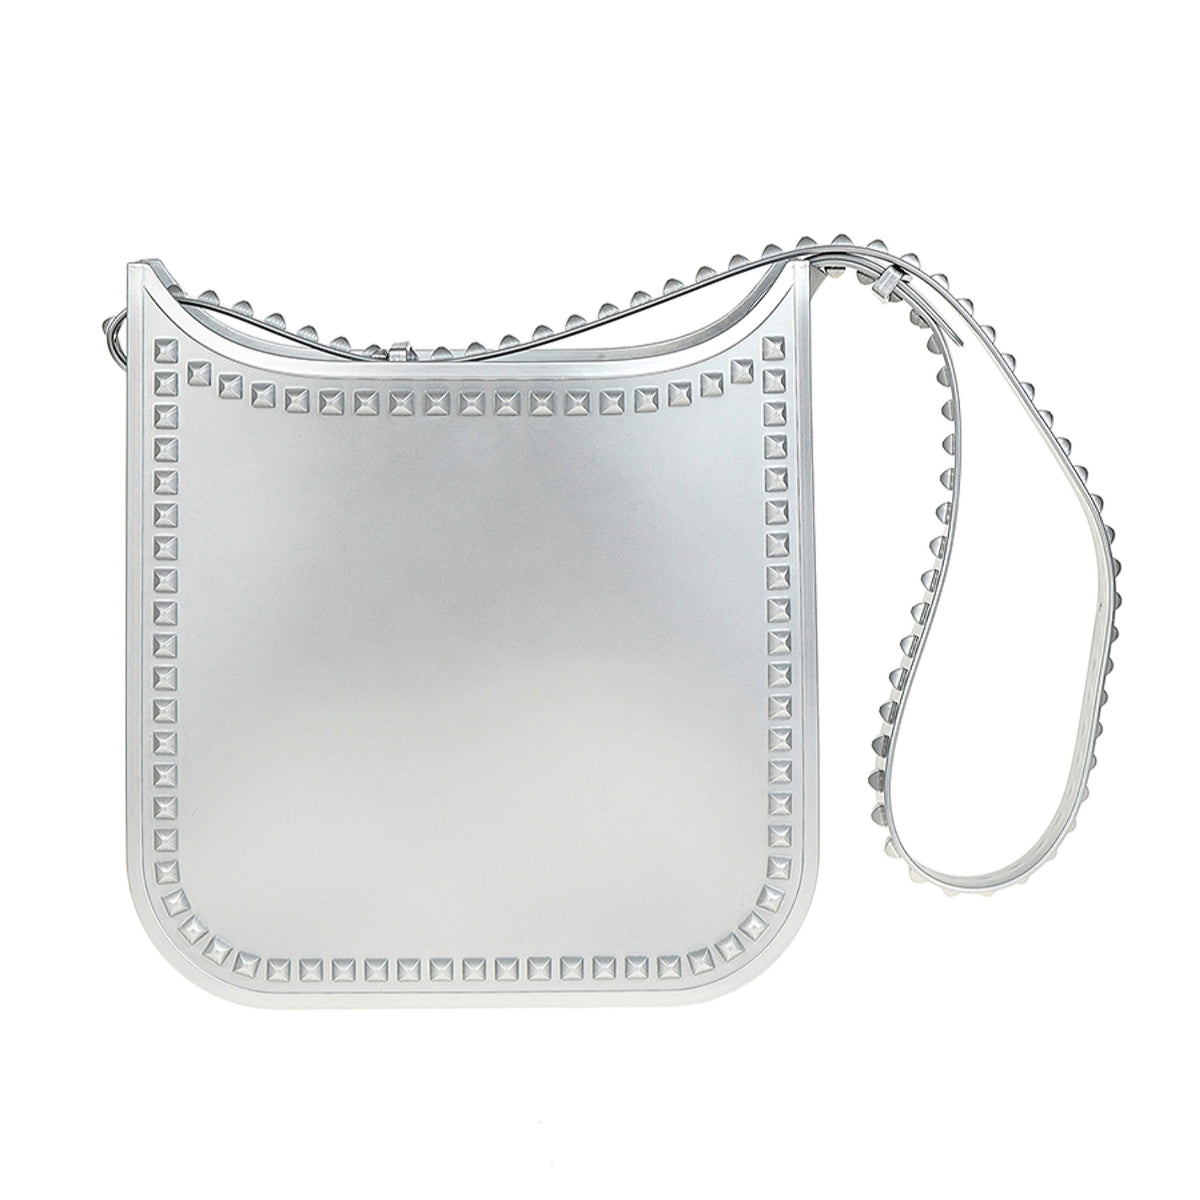 Silver jelly purse with studded design made in Italy